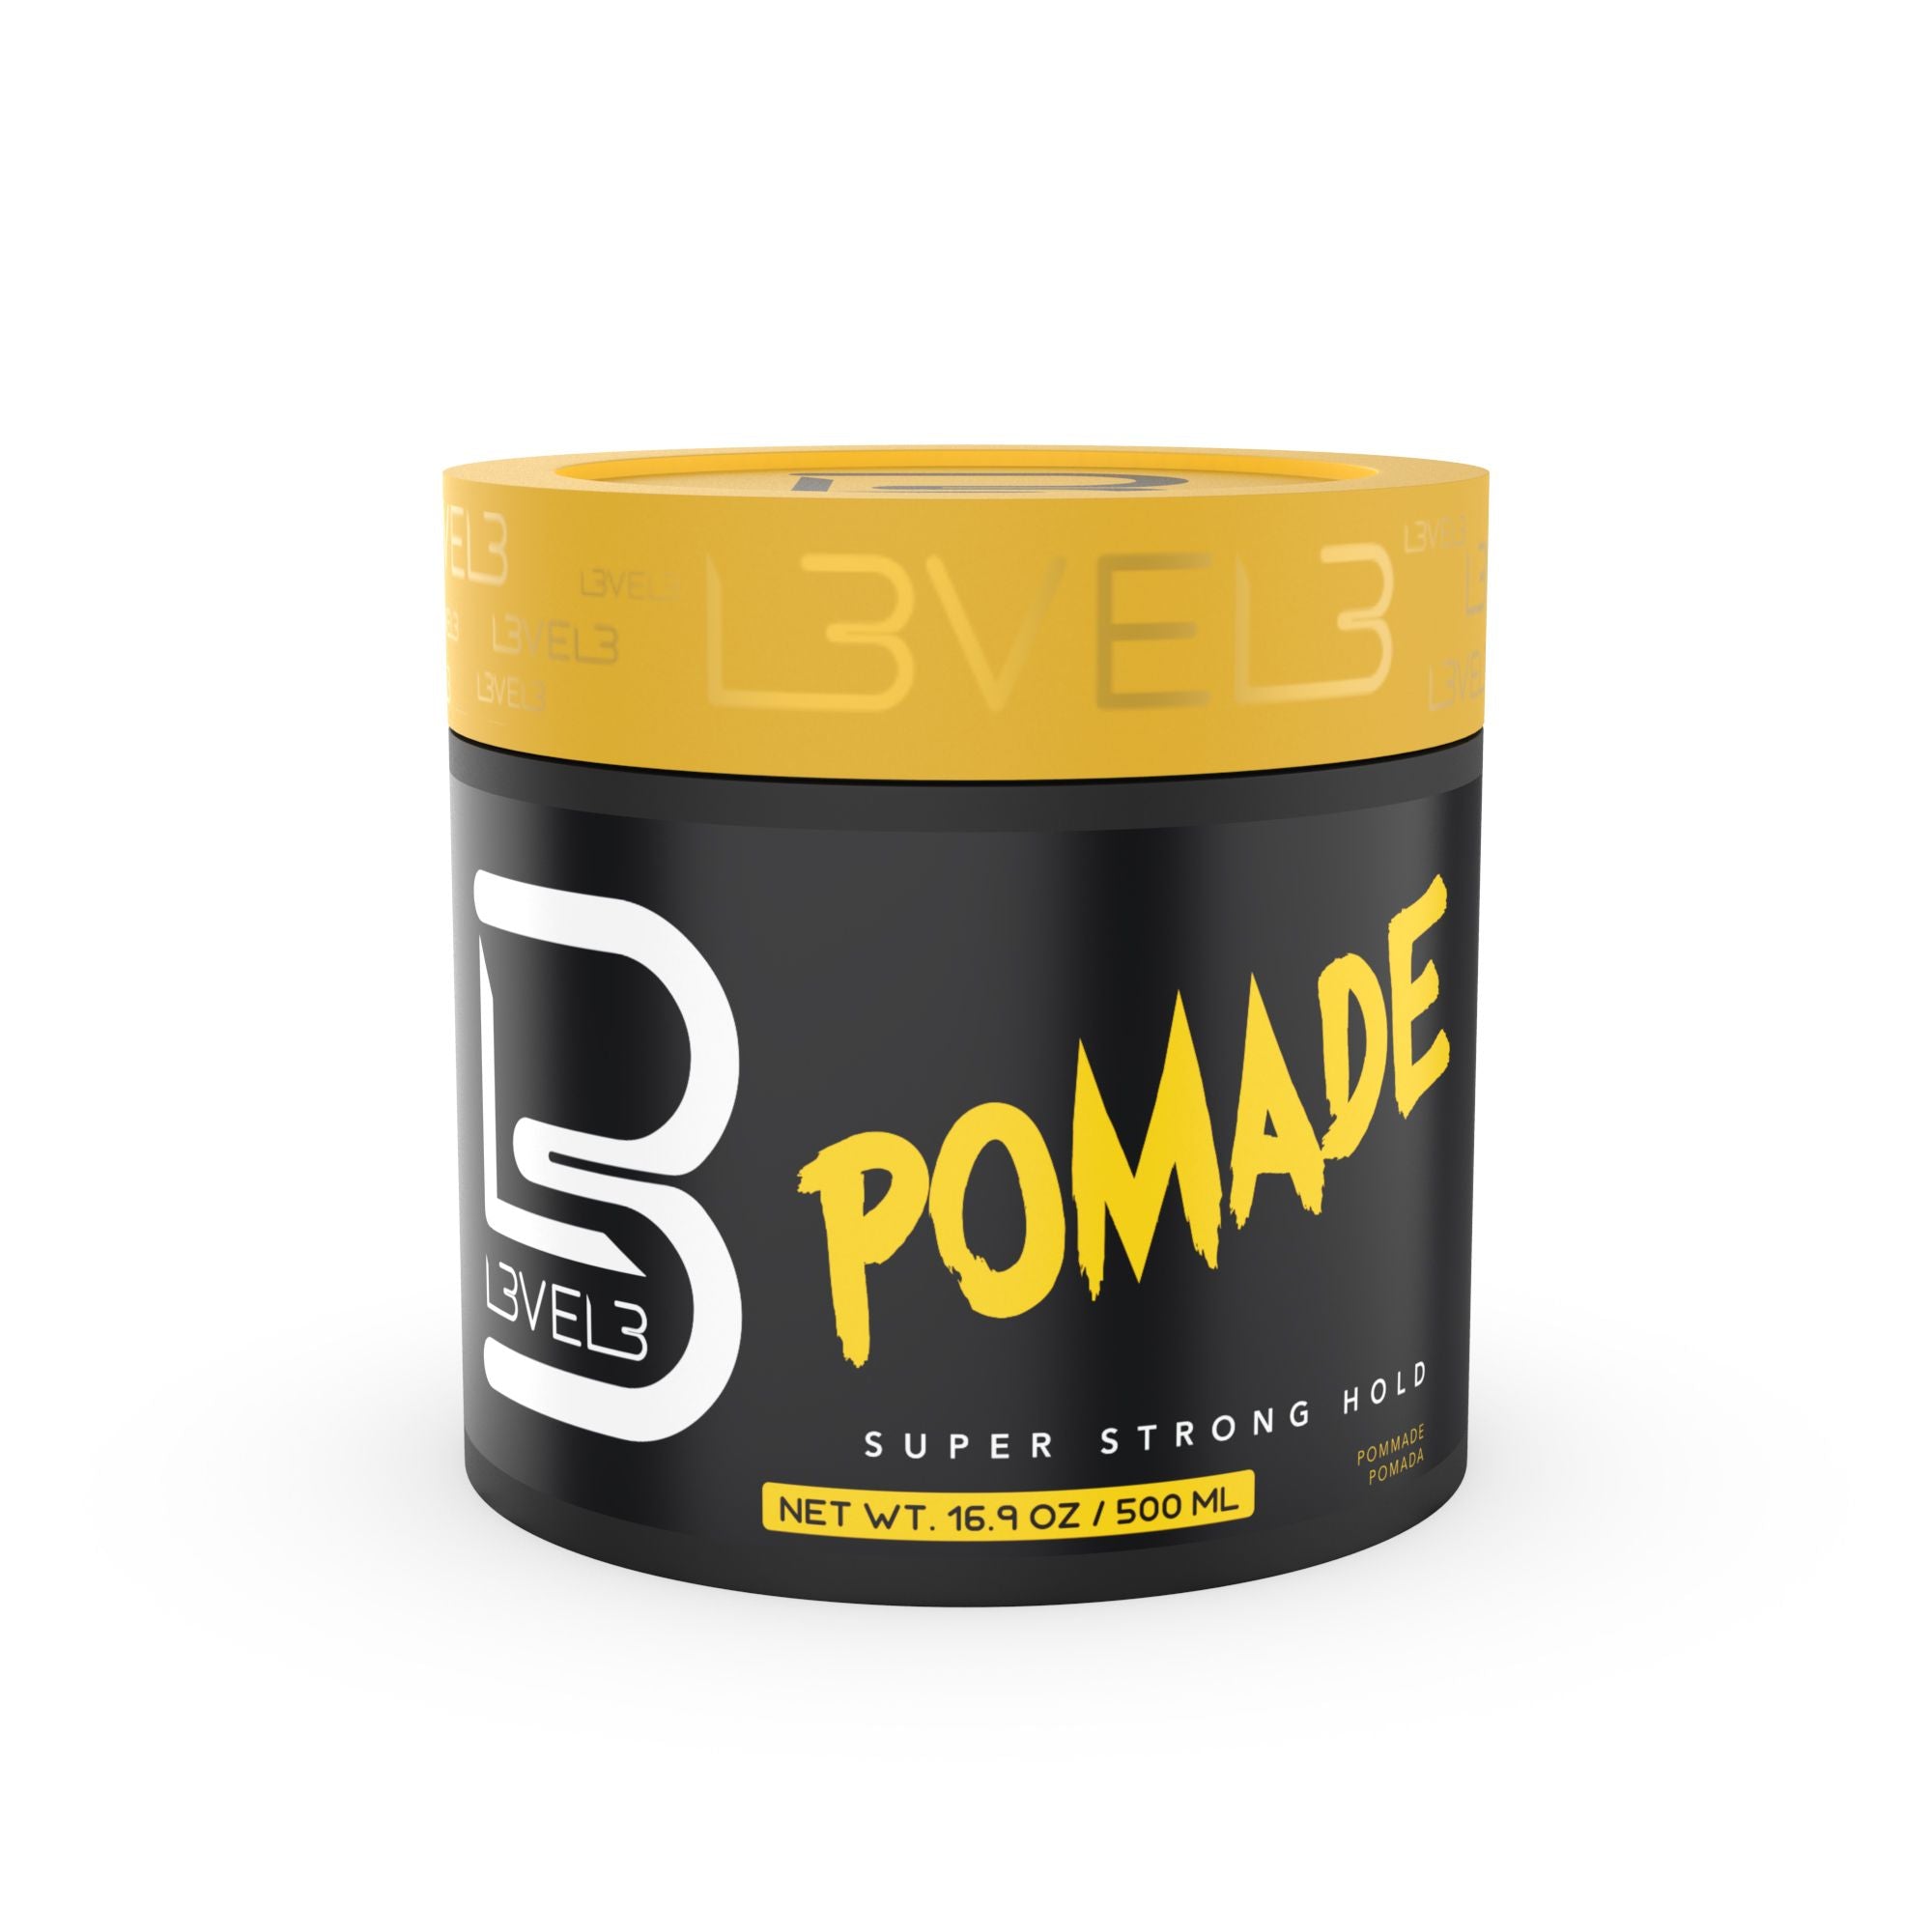 Hair Styling Pomade